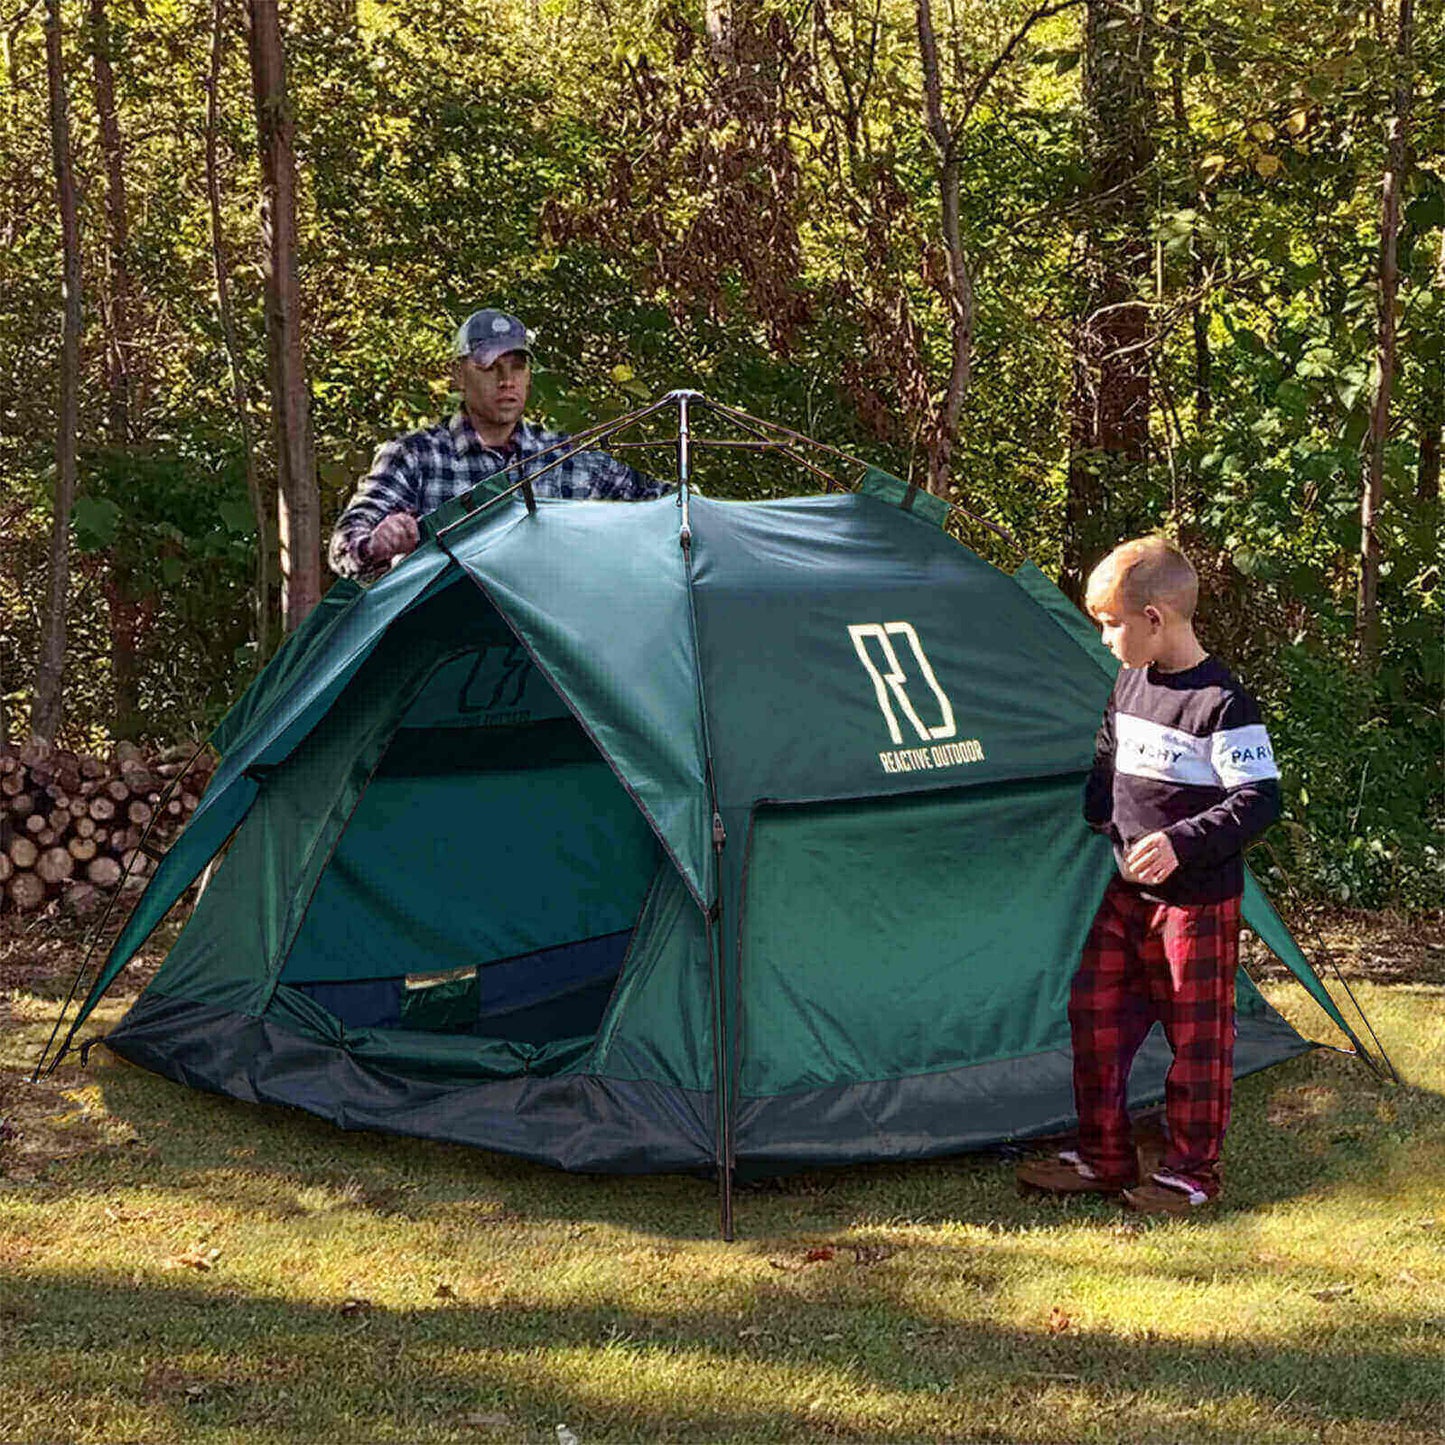 Large-Sized 3 Secs Tent + FREE Camping Tarp (For 2-3 Person, CA)